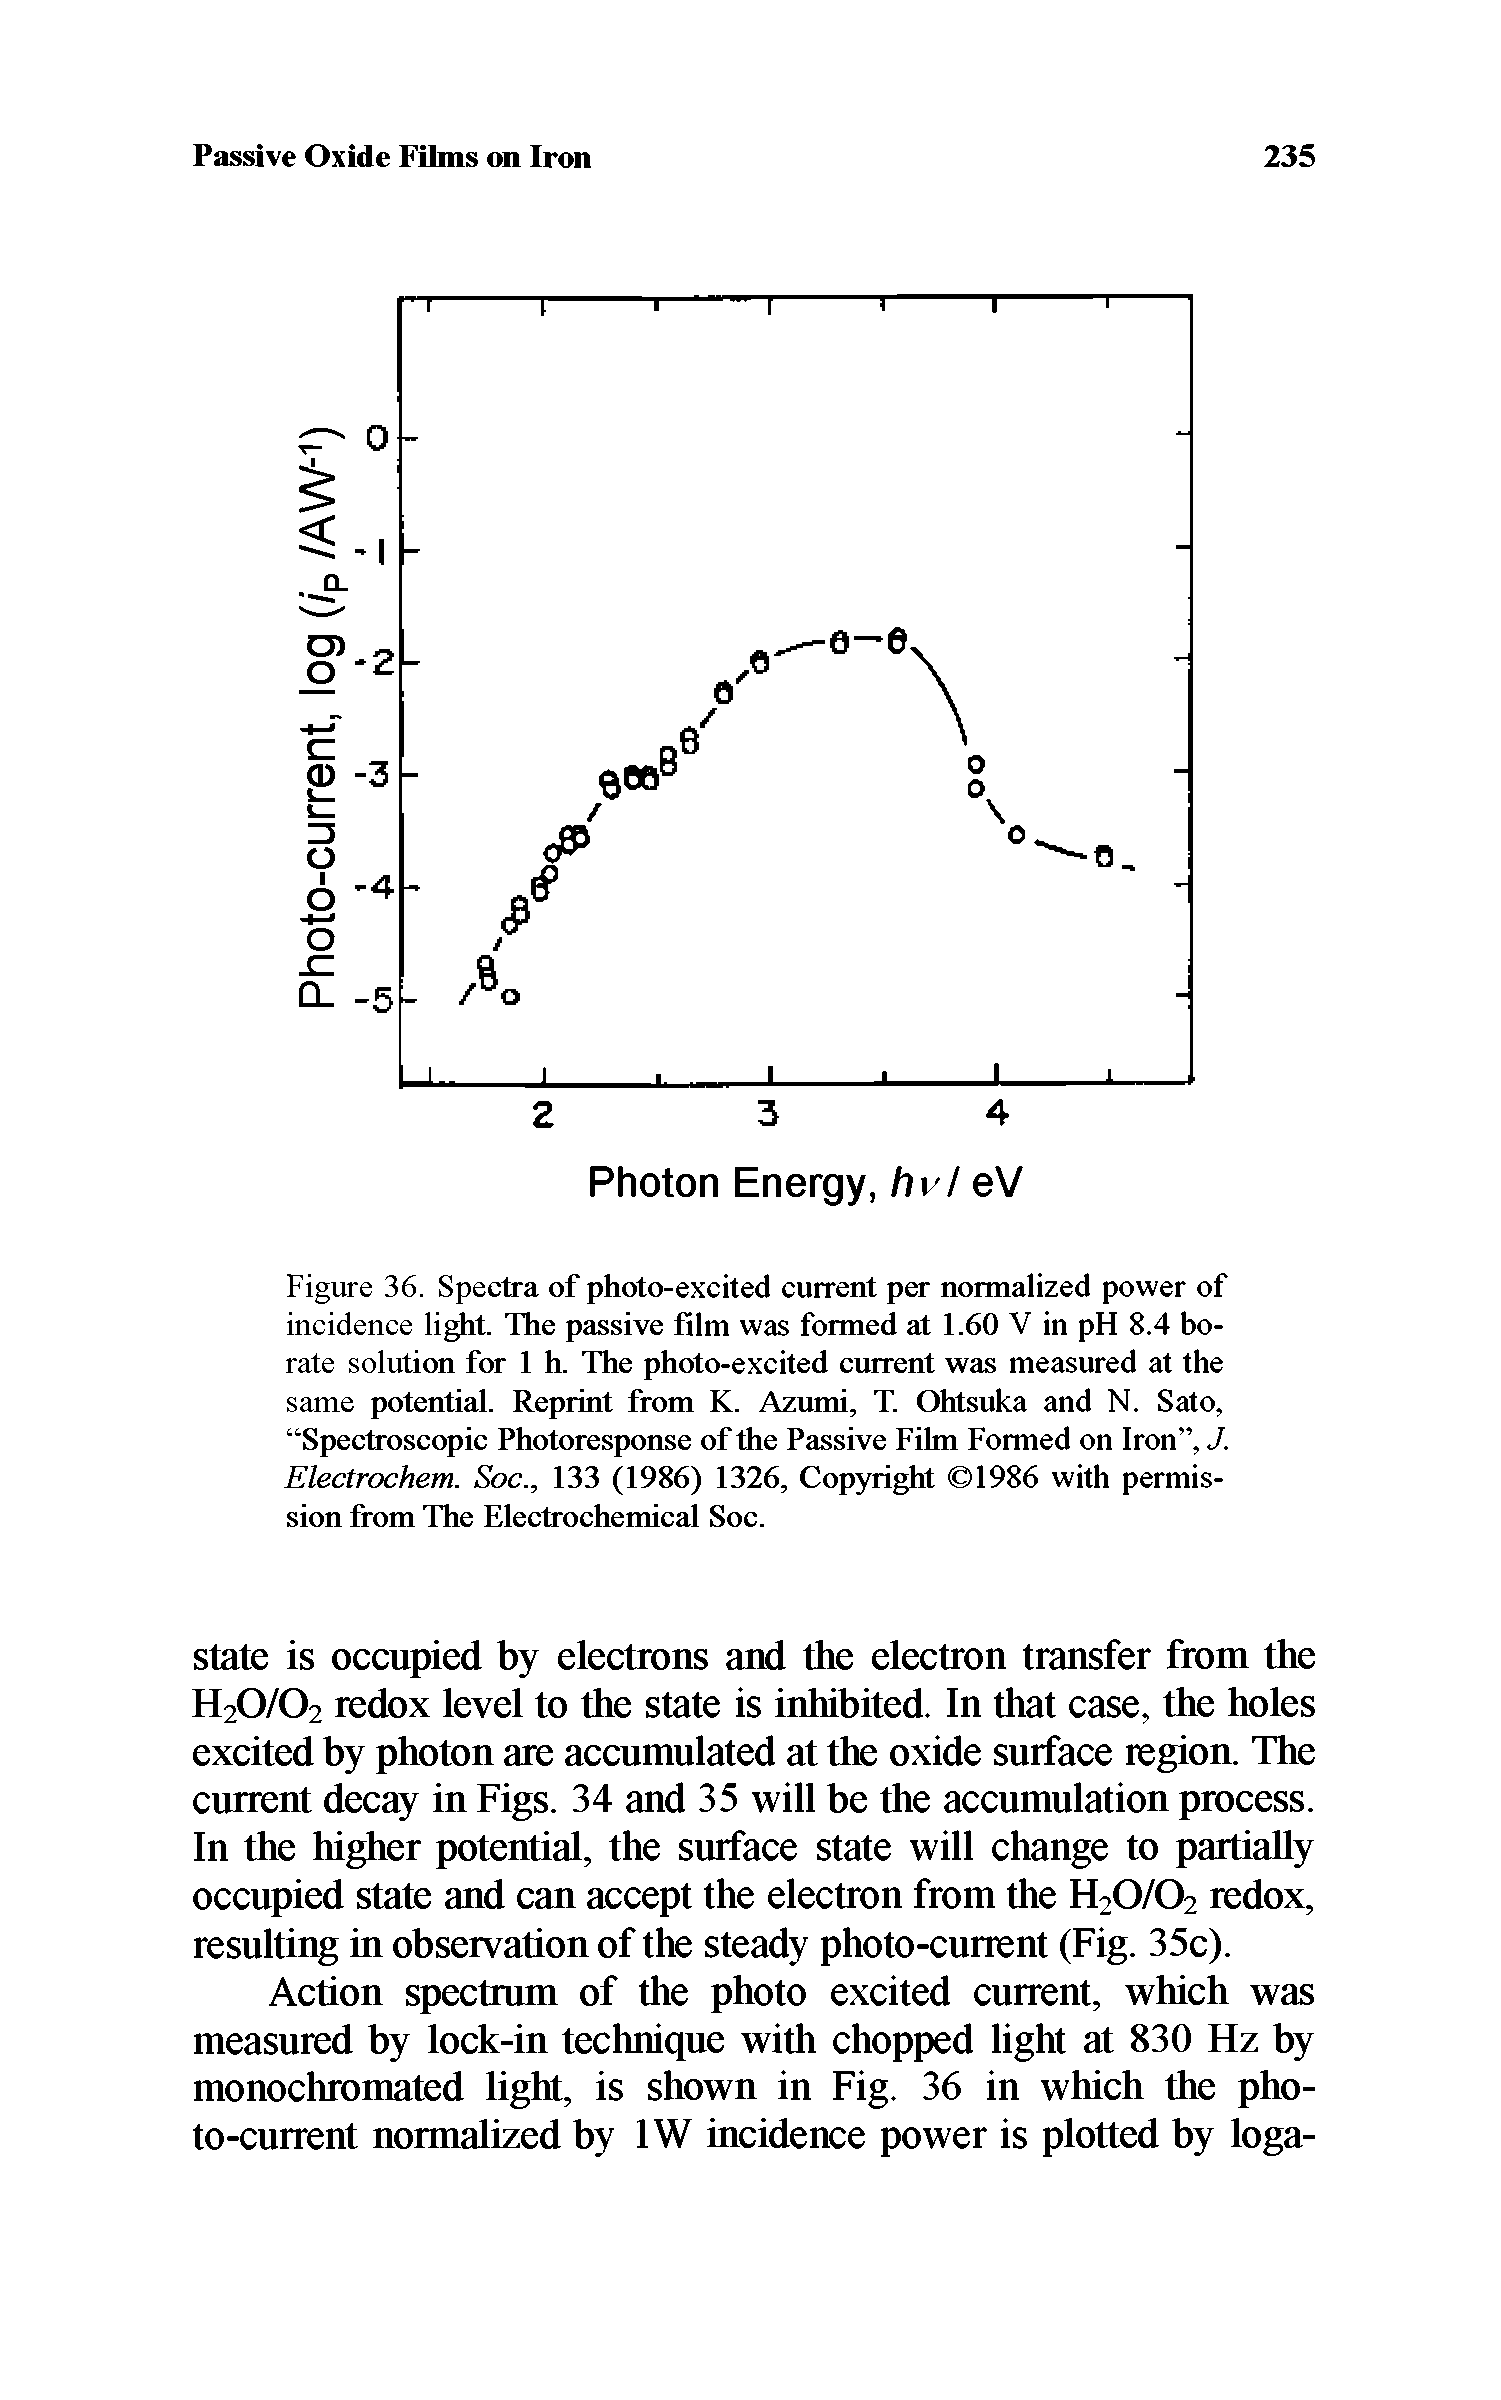 Figure 36. Spectra of photo-excited current per normalized power of incidence light. The passive film was formed at 1.60 V in pH 8.4 borate solution for 1 h. The photo-excited current was measured at the same potential. Reprint from K. Azumi, T. Ohtsuka and N. Sato, Spectroscopic Photoresponse of the Passive Film Formed on Iron , J. Electrochem. Soc., 133 (1986) 1326, Copyright 1986 with permission from The Electrochemical Soc.